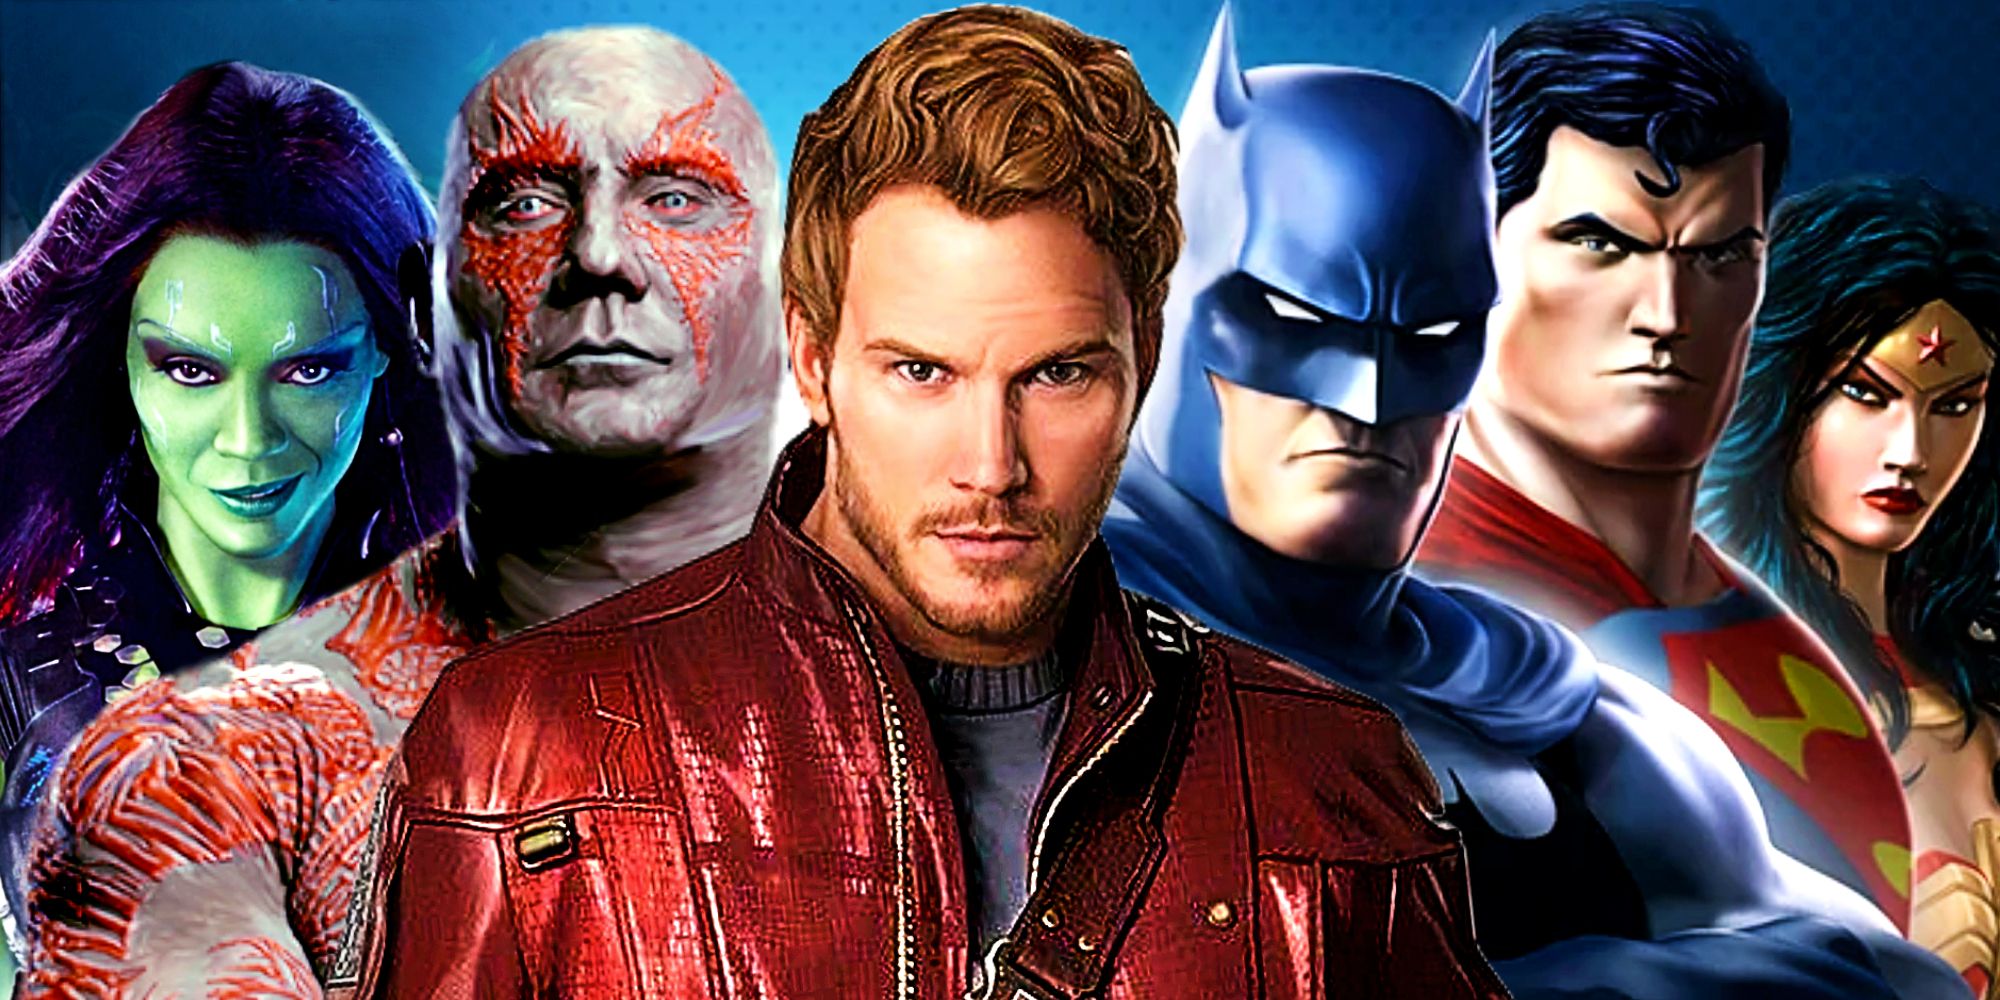 Marvel's Guardians of the Galaxy and DC's Justice League